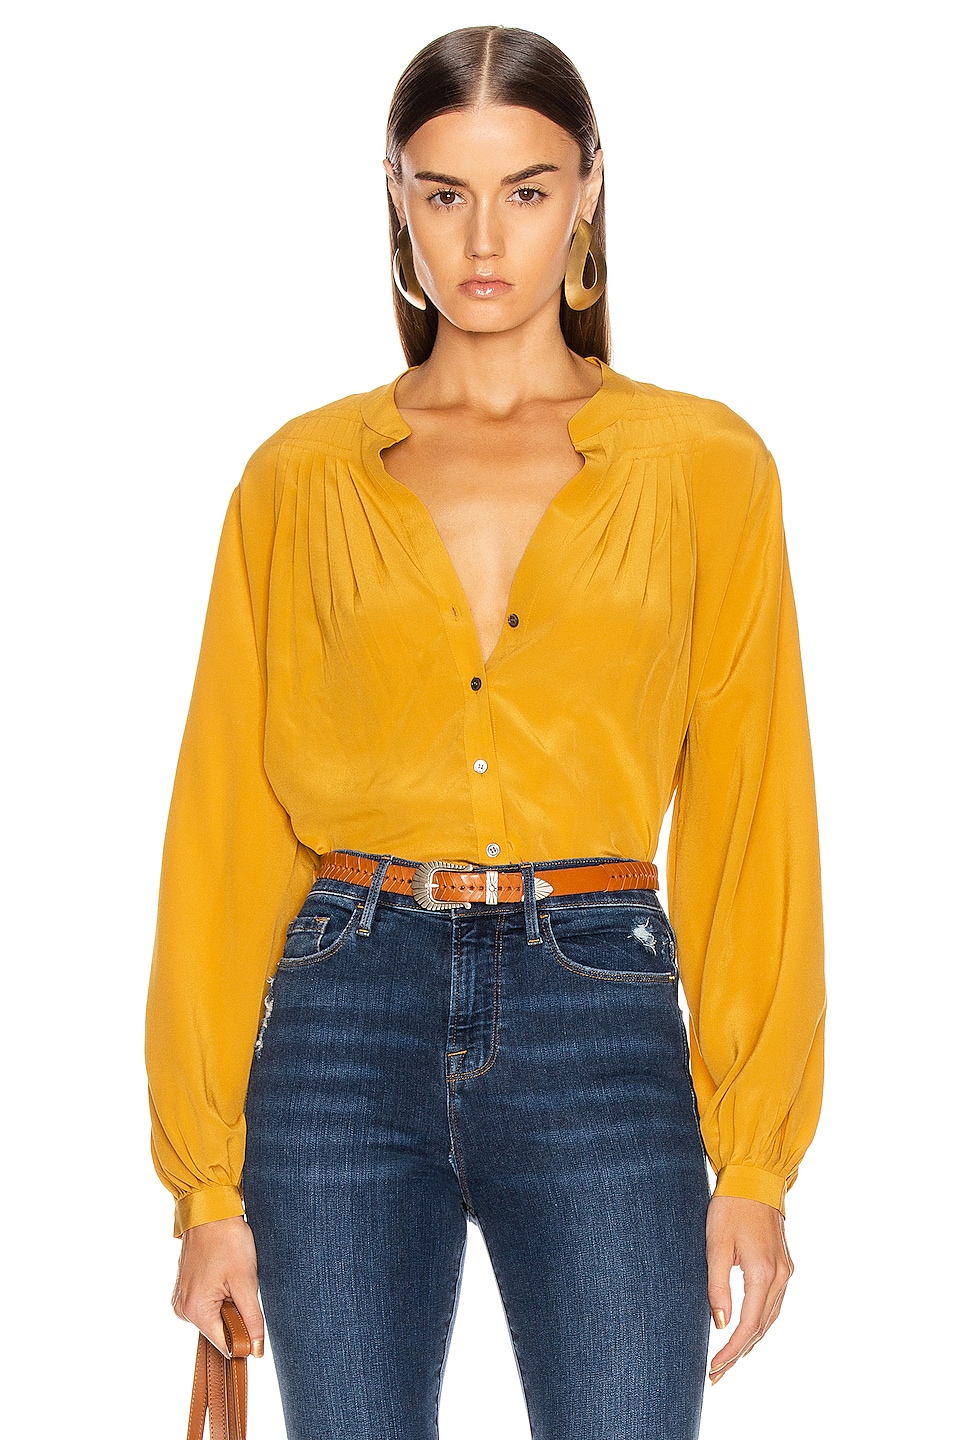 FRAME Pleated Blouse in Marigold | FWRD